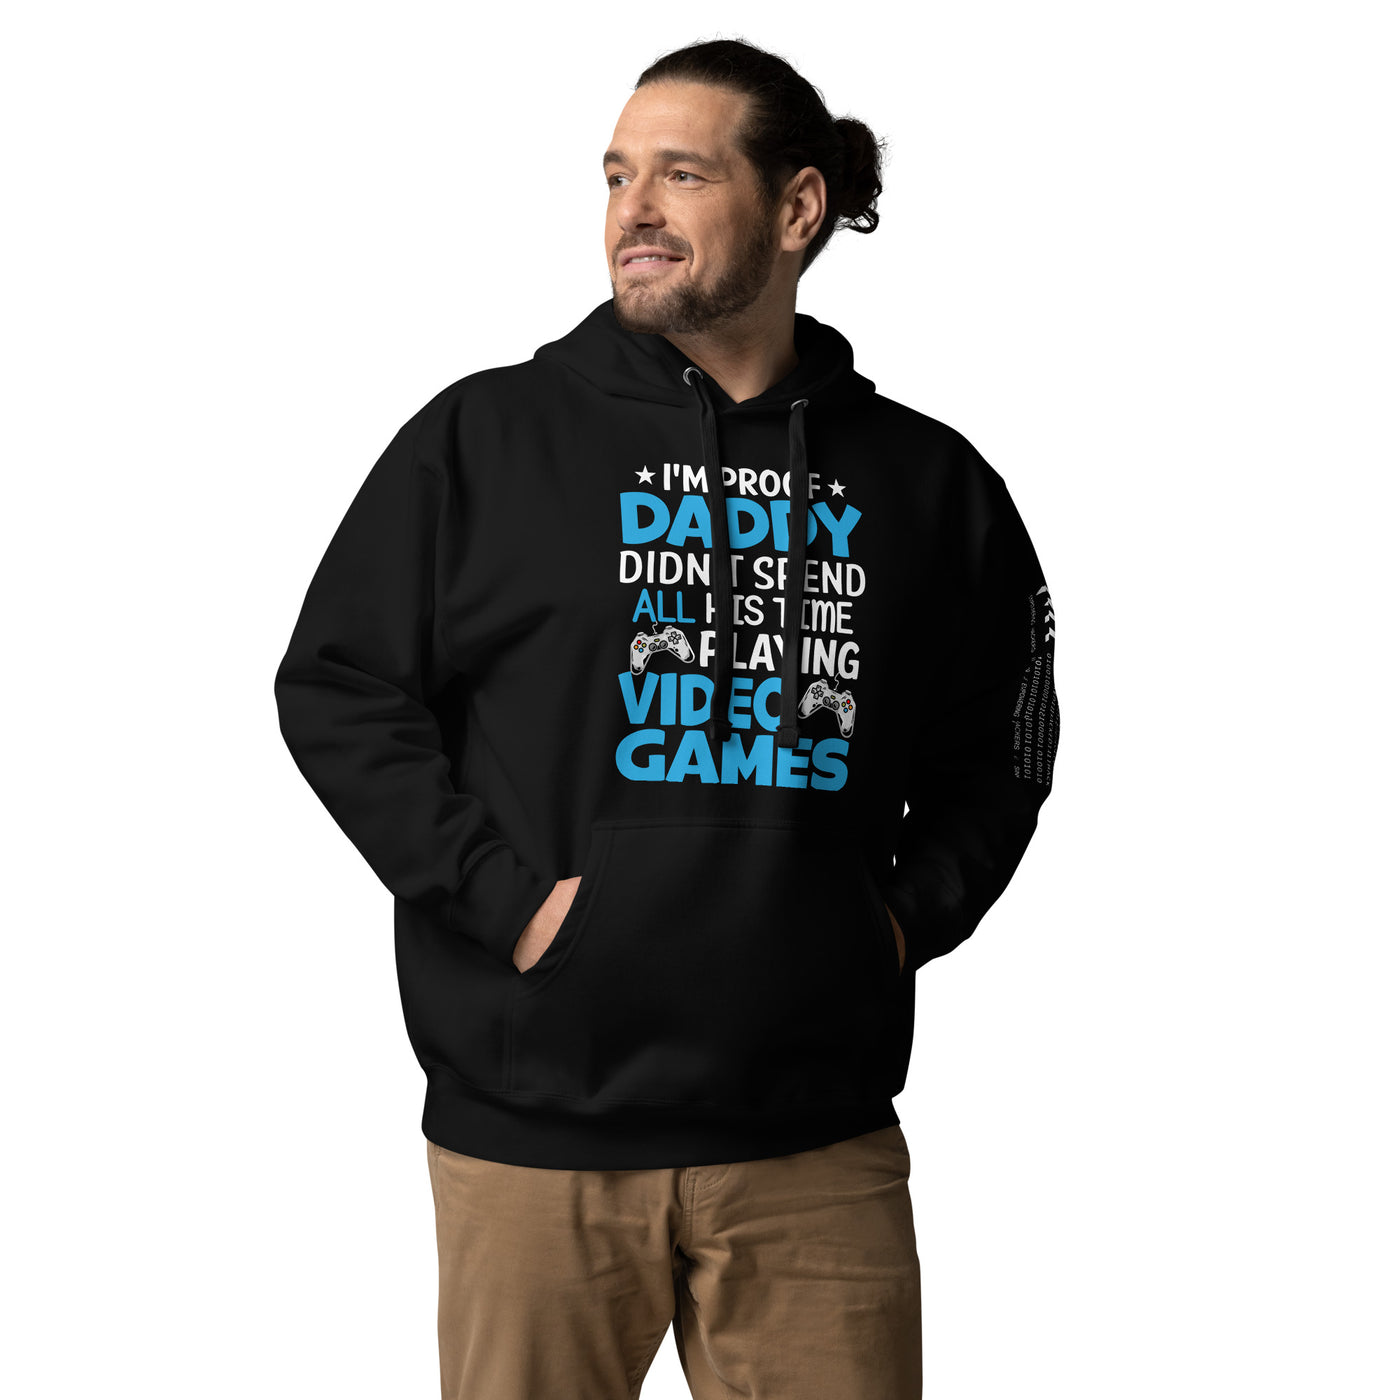 I am Proof * Daddy didn't spend his time playing Video Games* - Unisex Hoodie